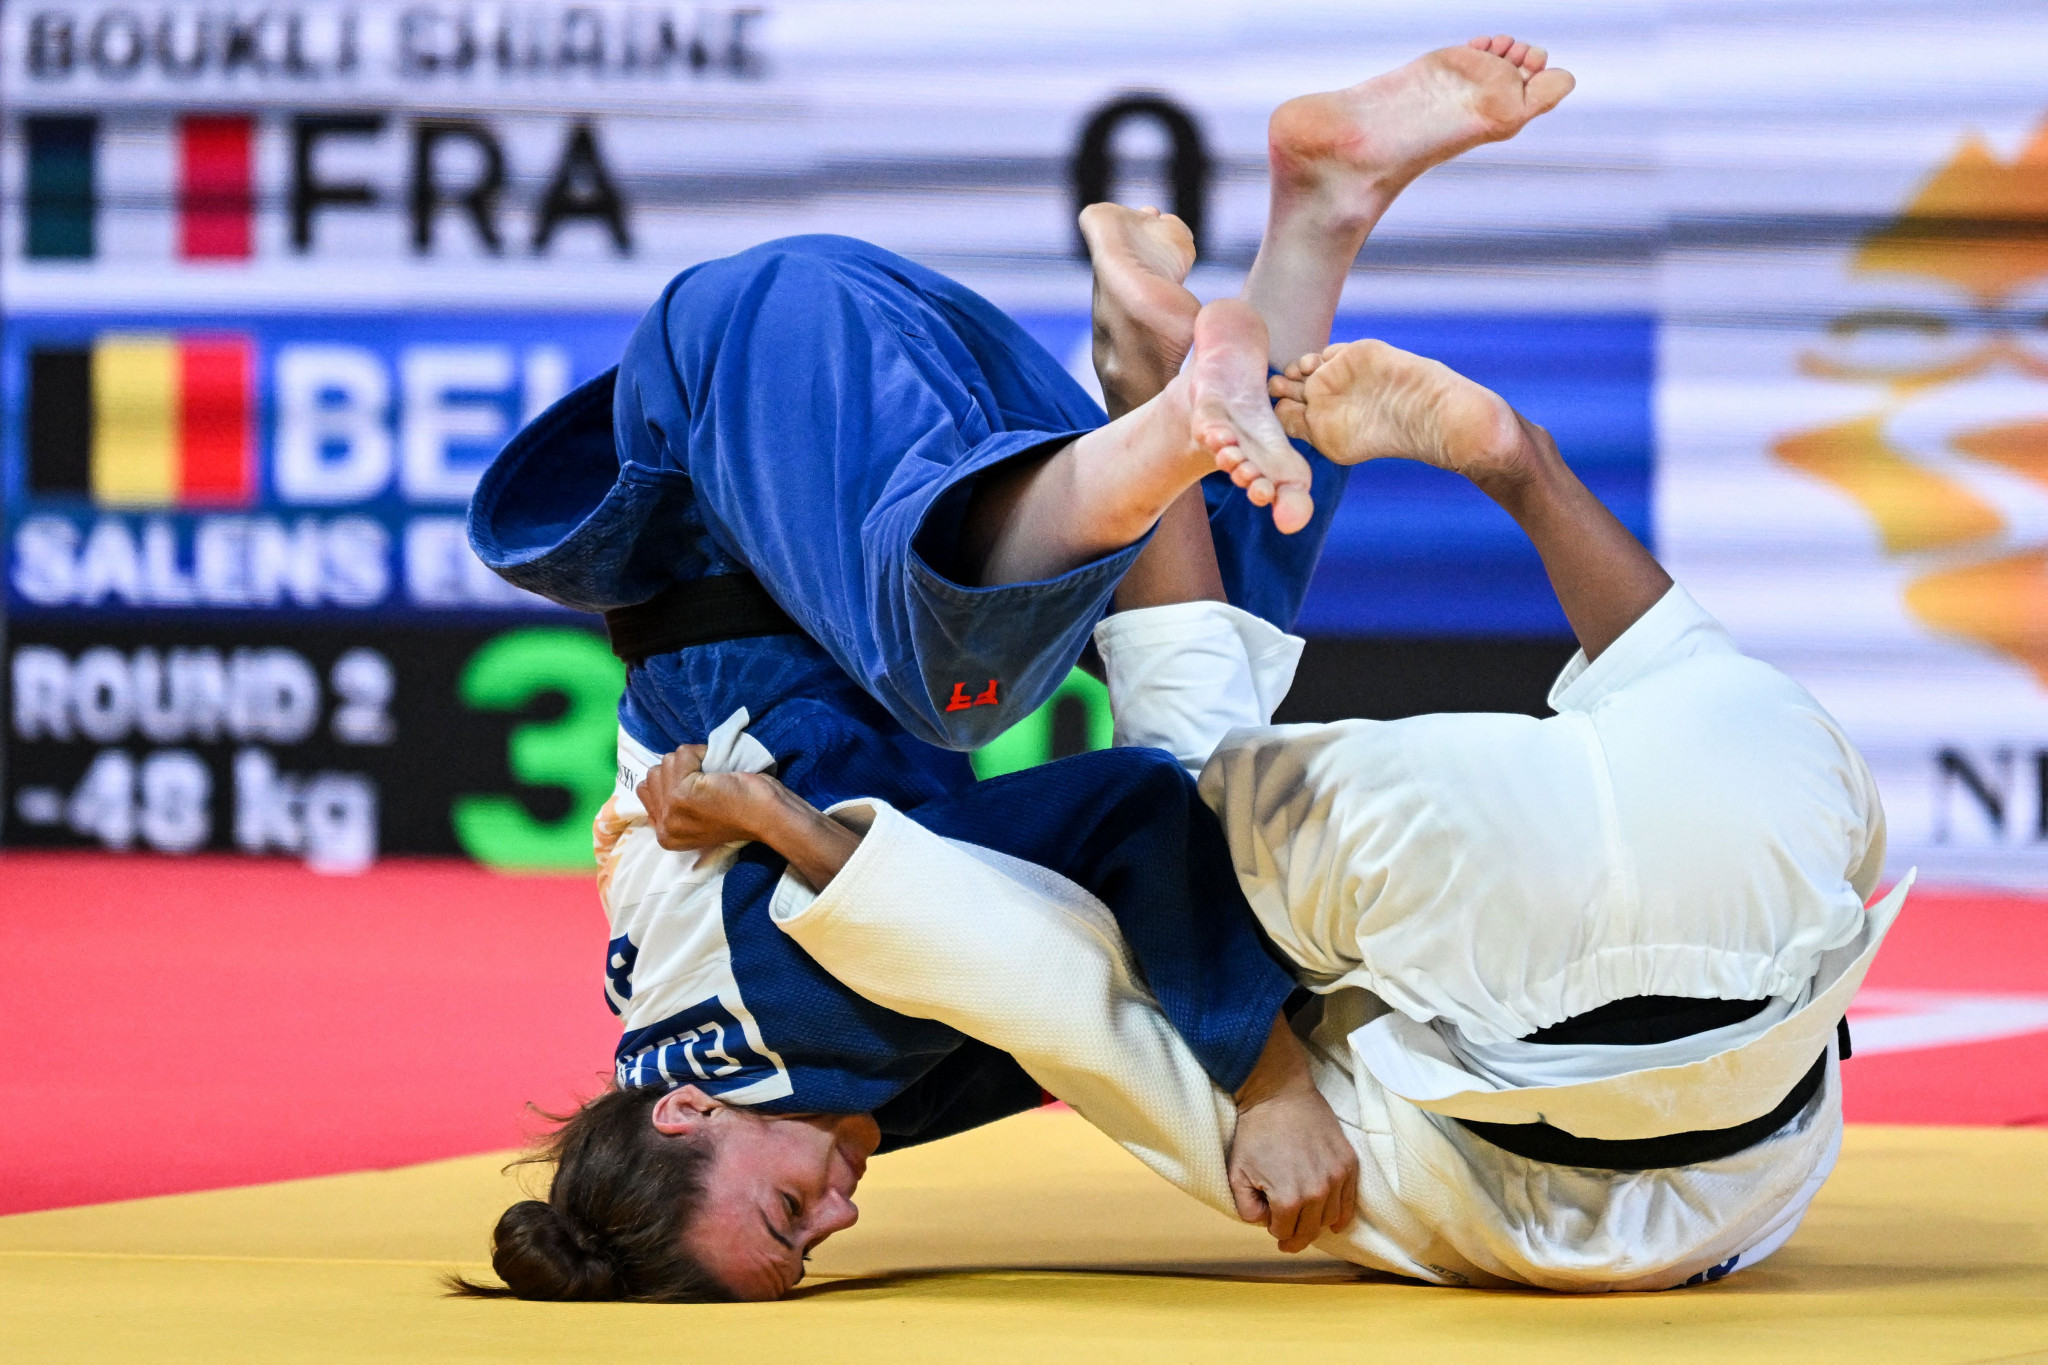 insidethegames is reporting LIVE from the World Judo Championships in Tashkent